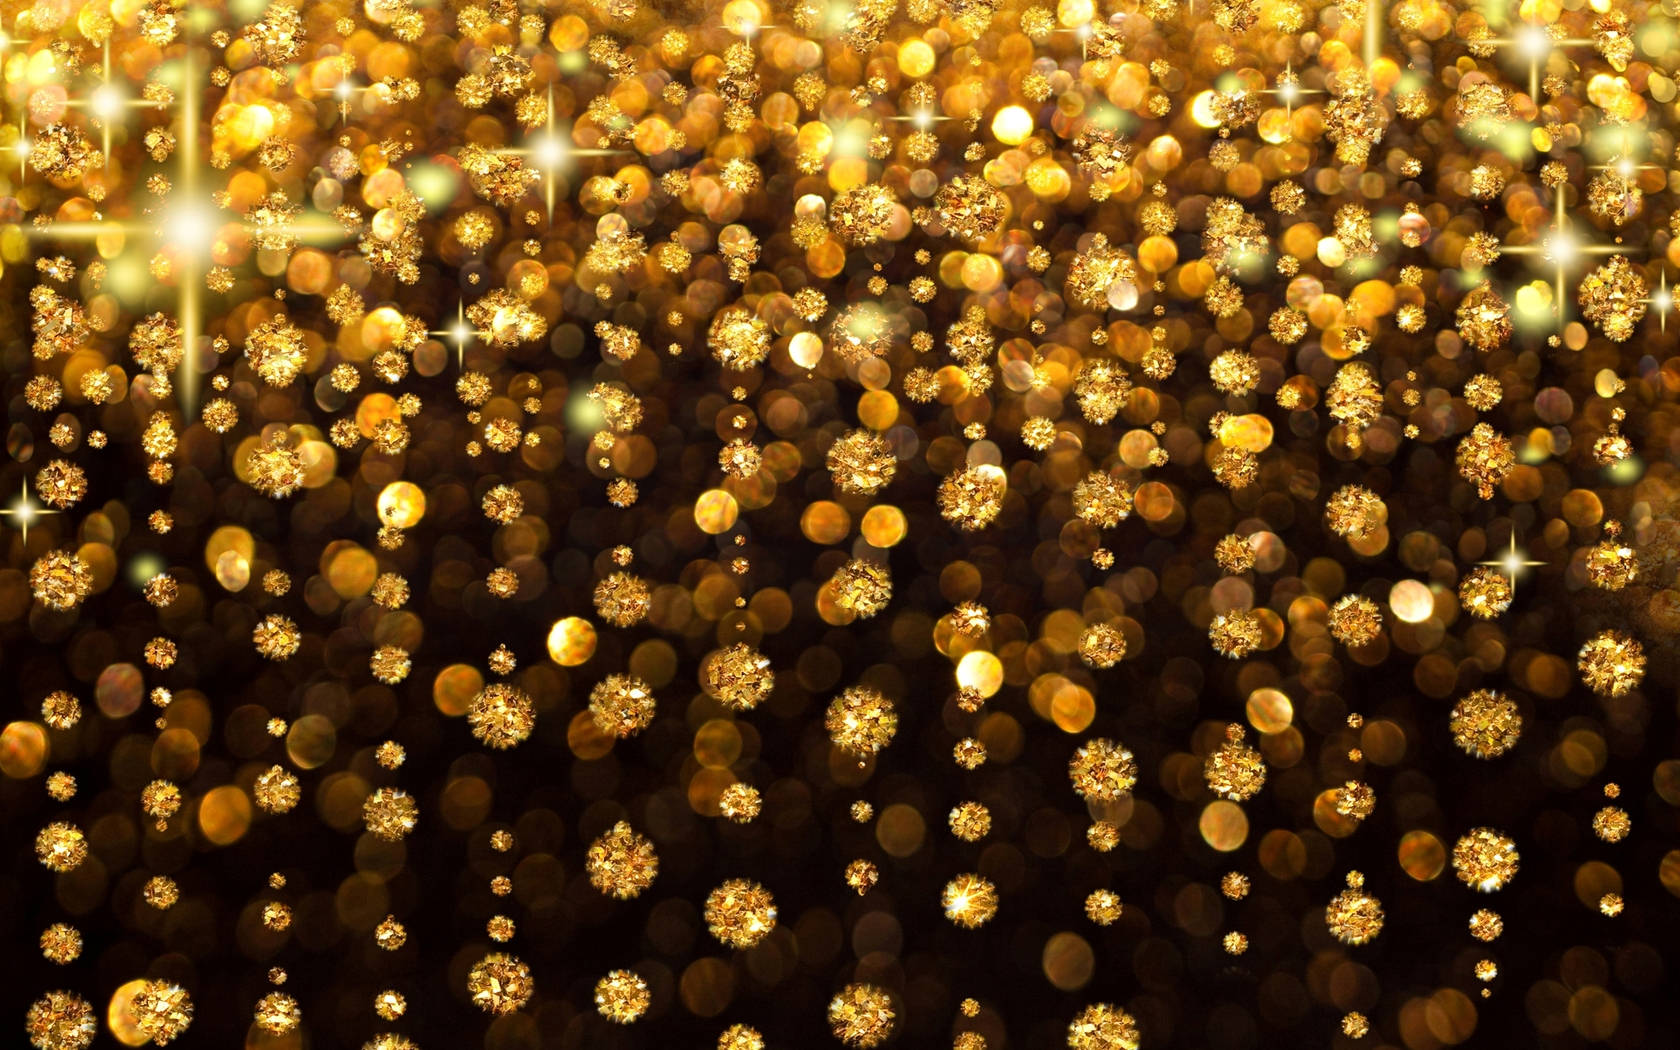 Sparkly Gold Rain Effects Wallpaper